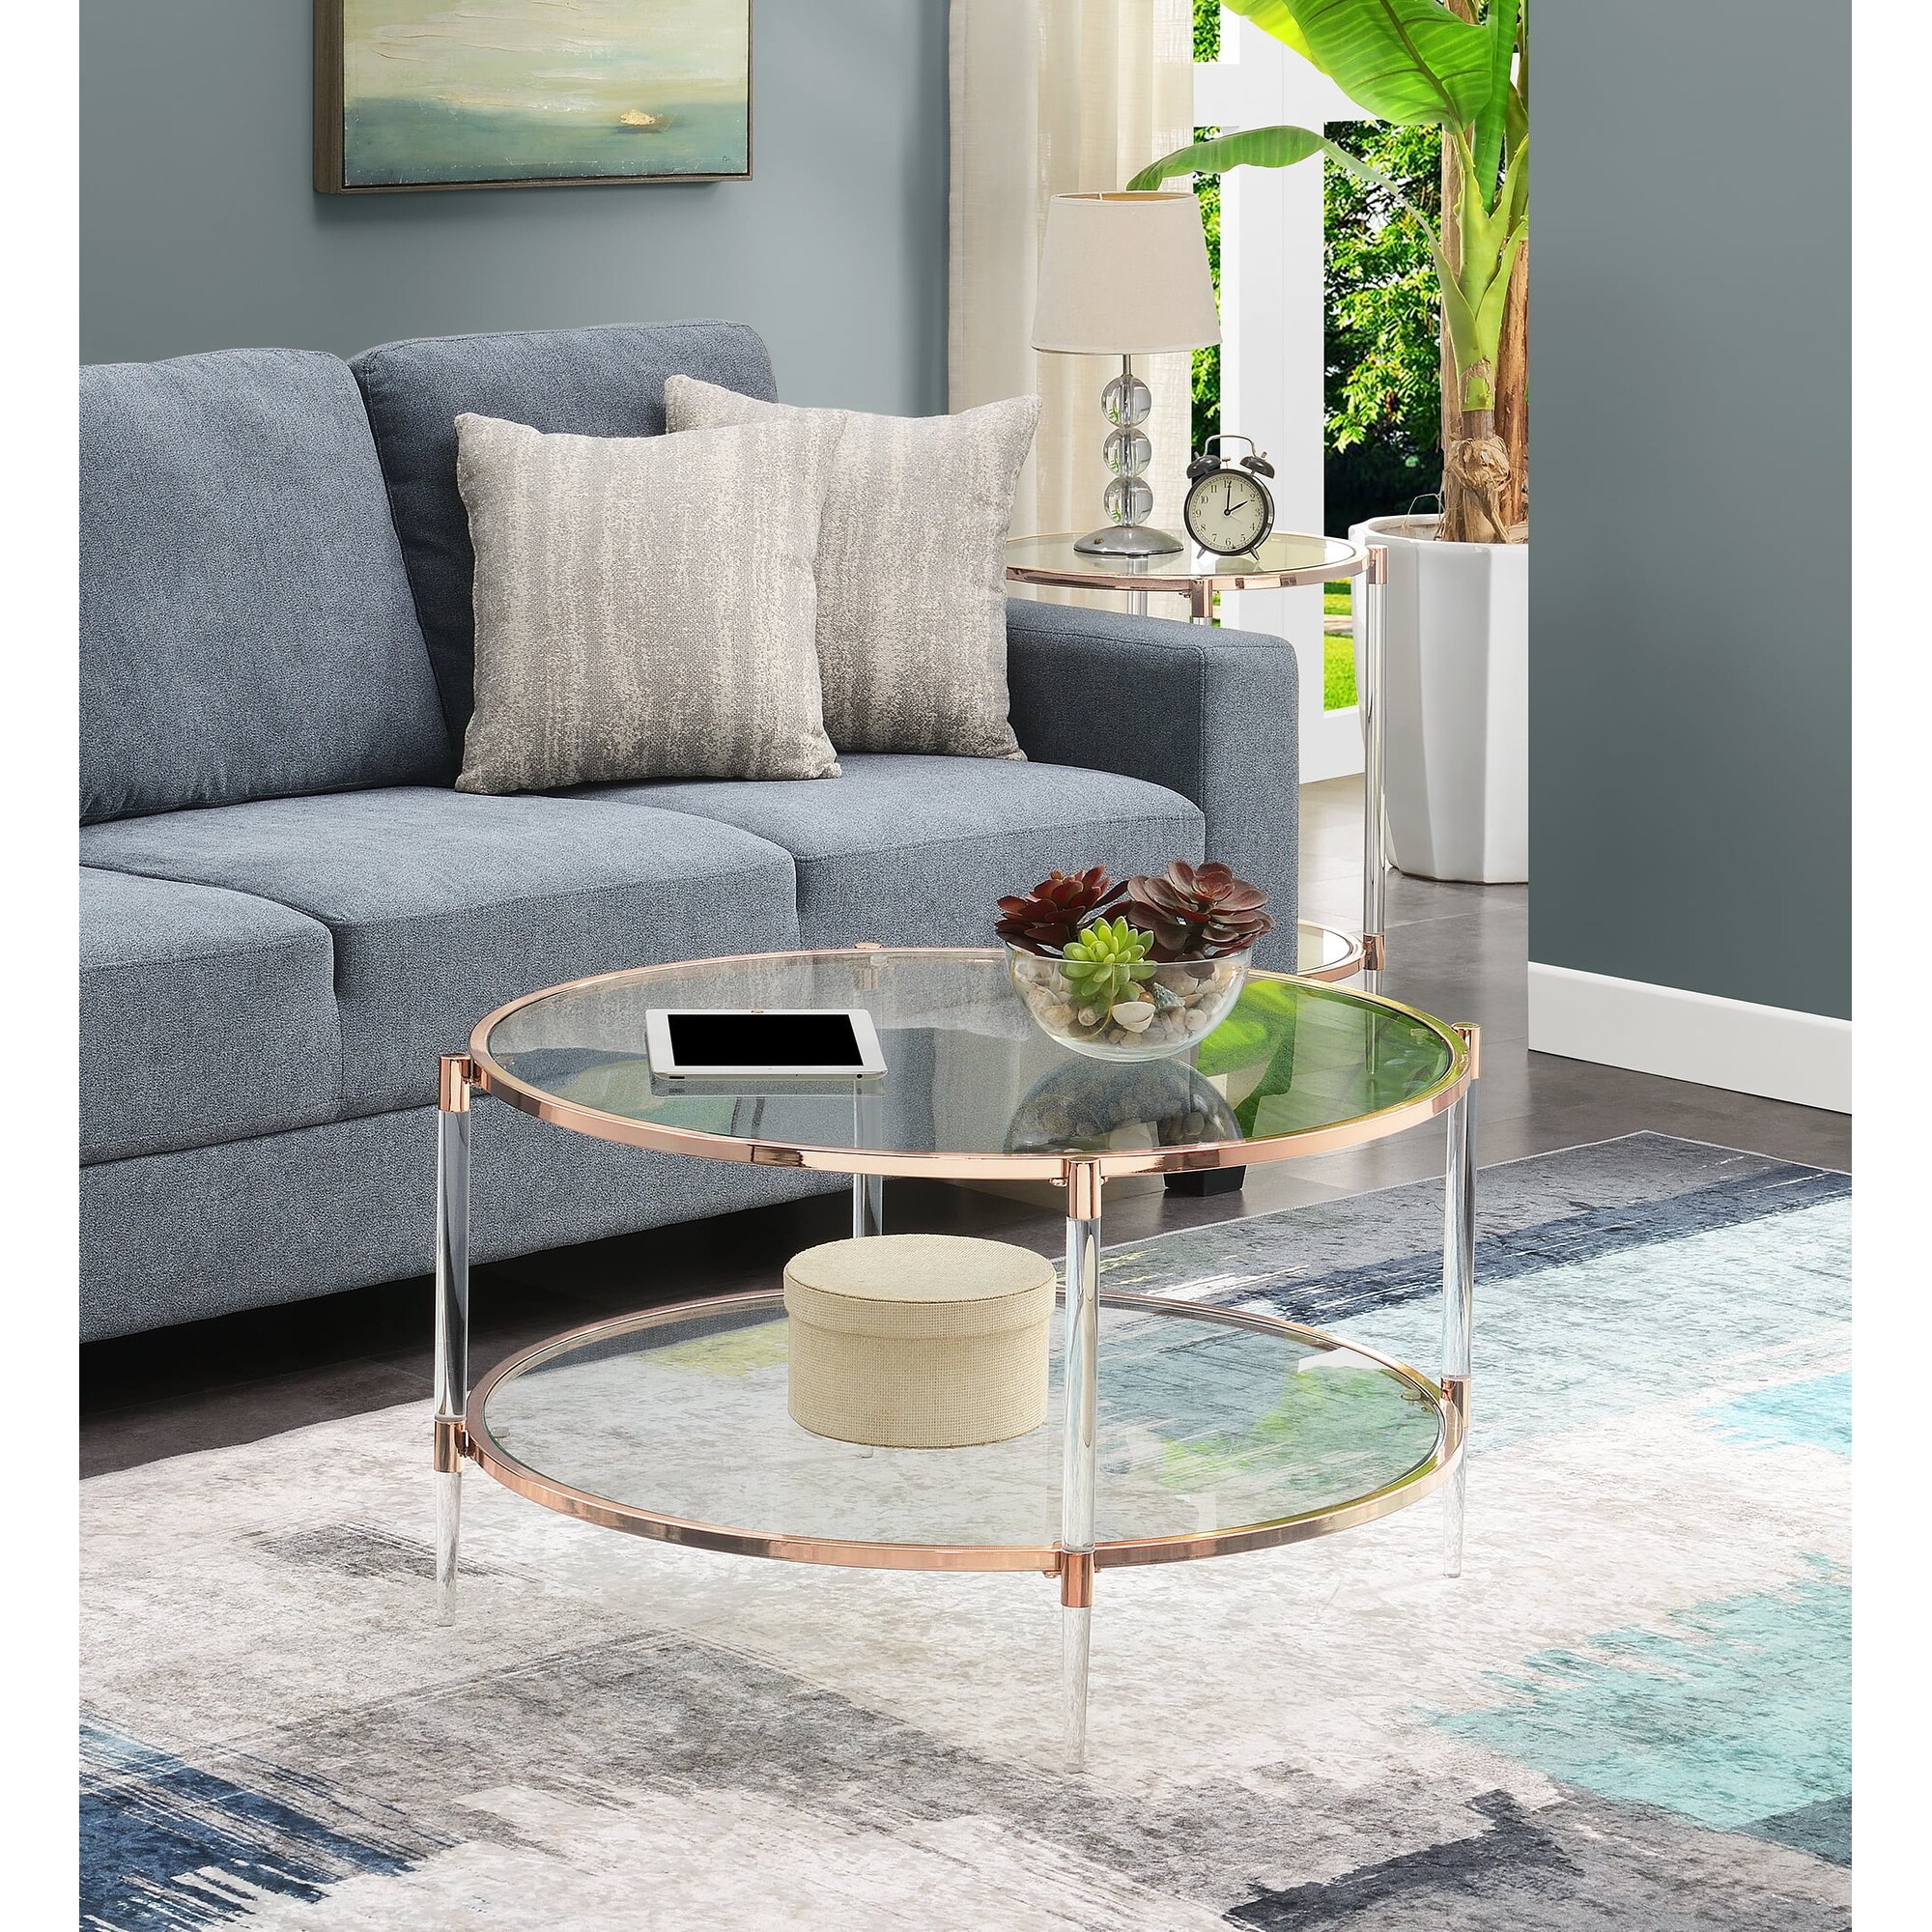 Global Pronex Royal Crest Acrylic Glass Coffee Table, Clear/Gold